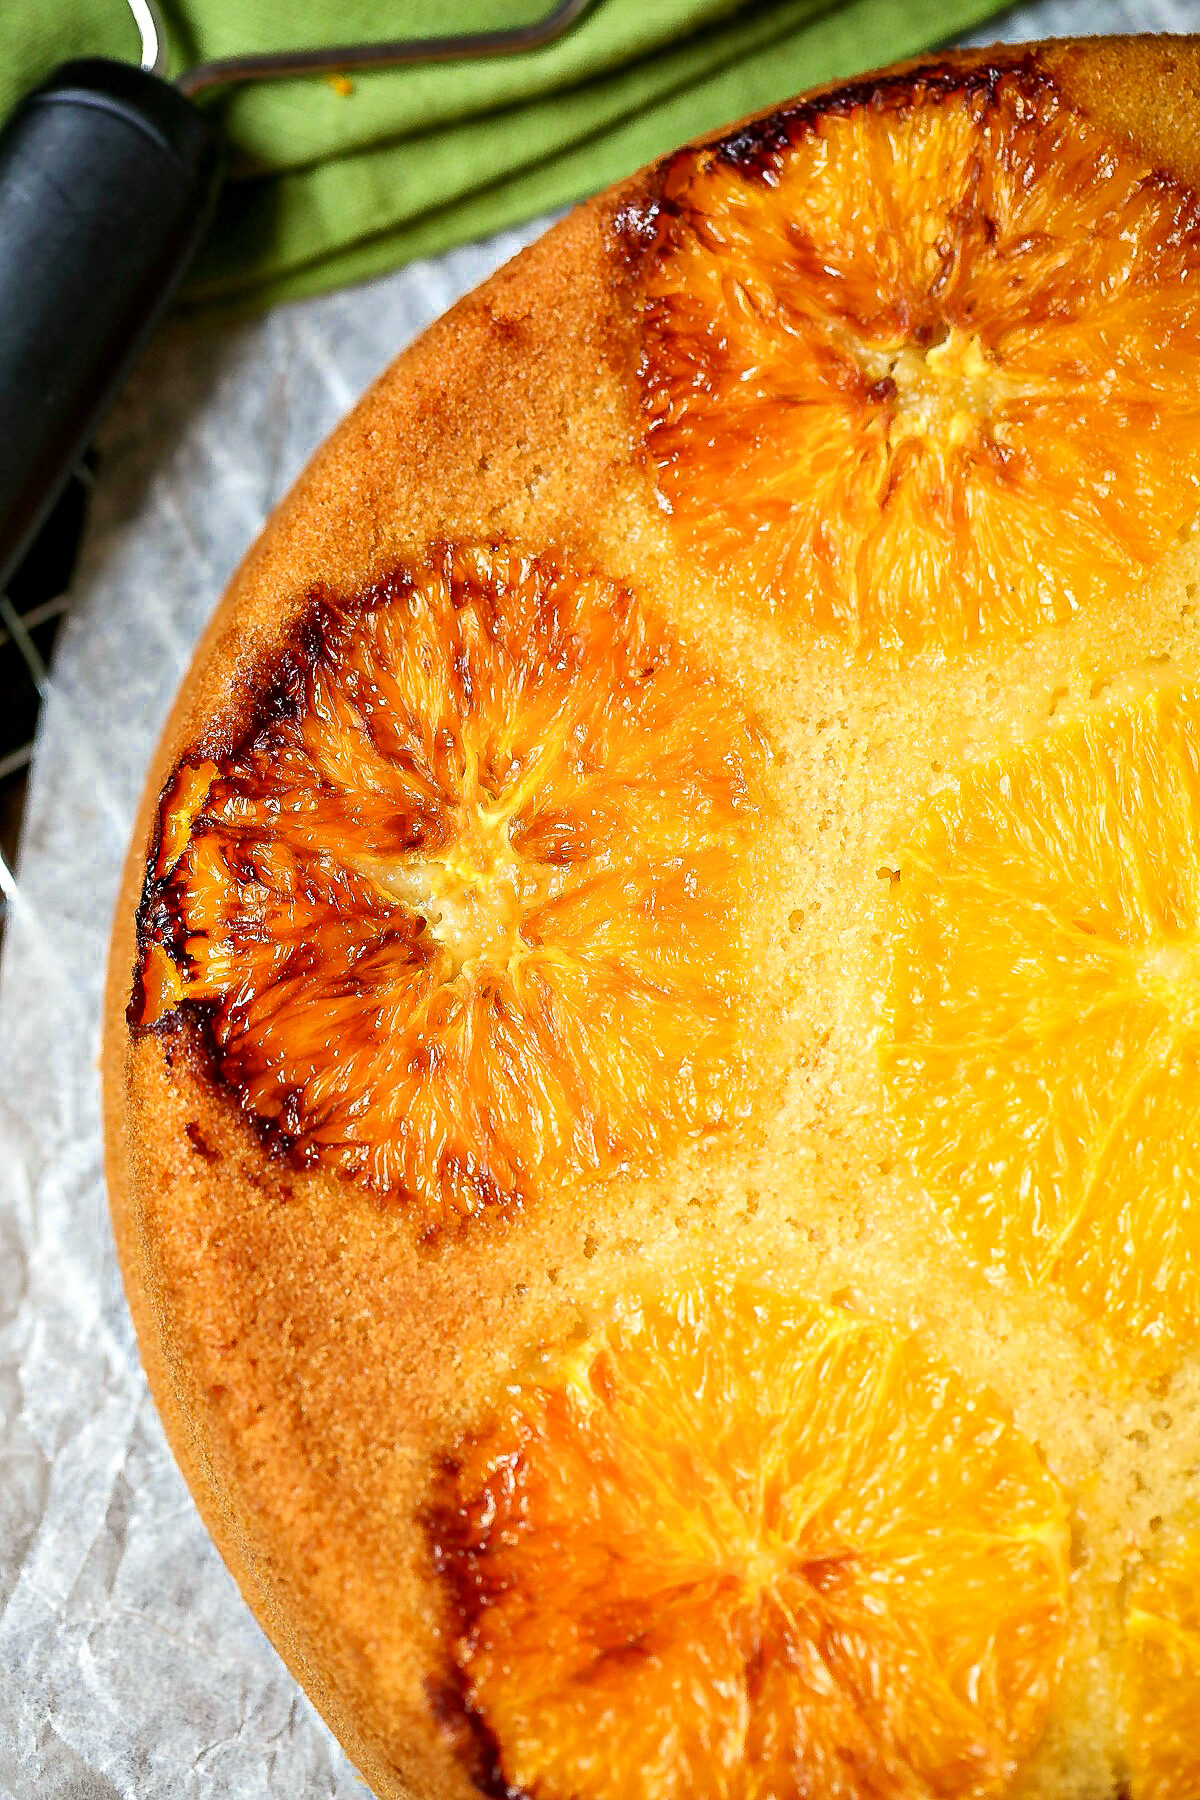 This easy to make Orange Buttermilk Upside-Down Cake is a twist on the classic. A rich and delicious dessert your whole family will love!